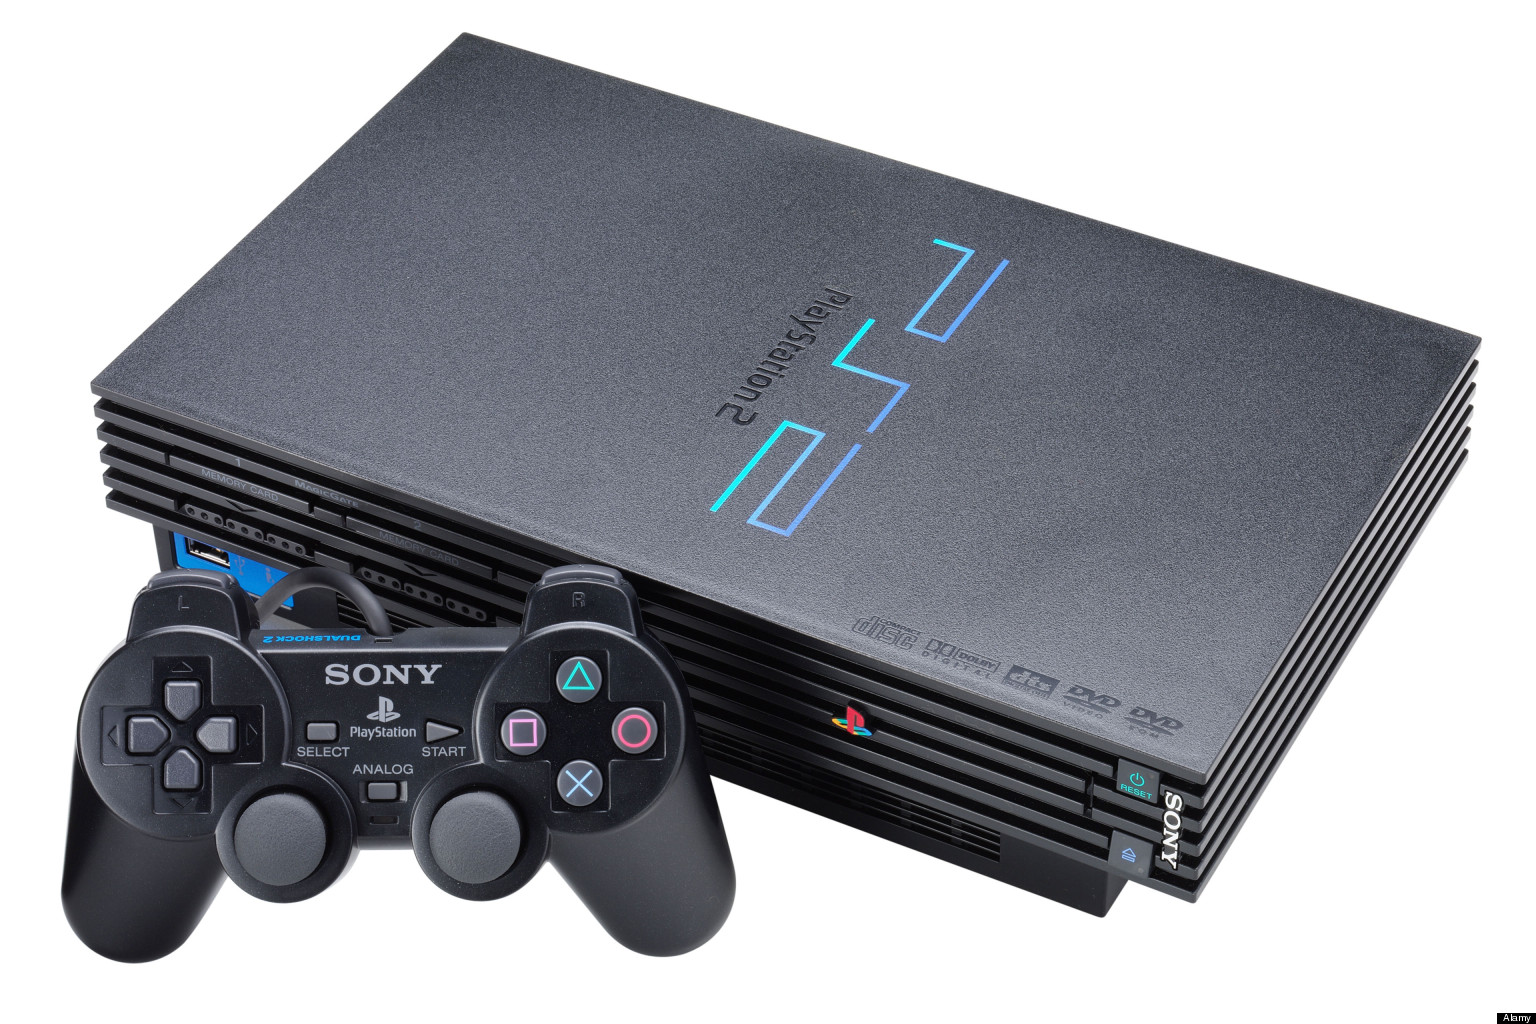 It's the 15th Anniversary of the PlayStation 2